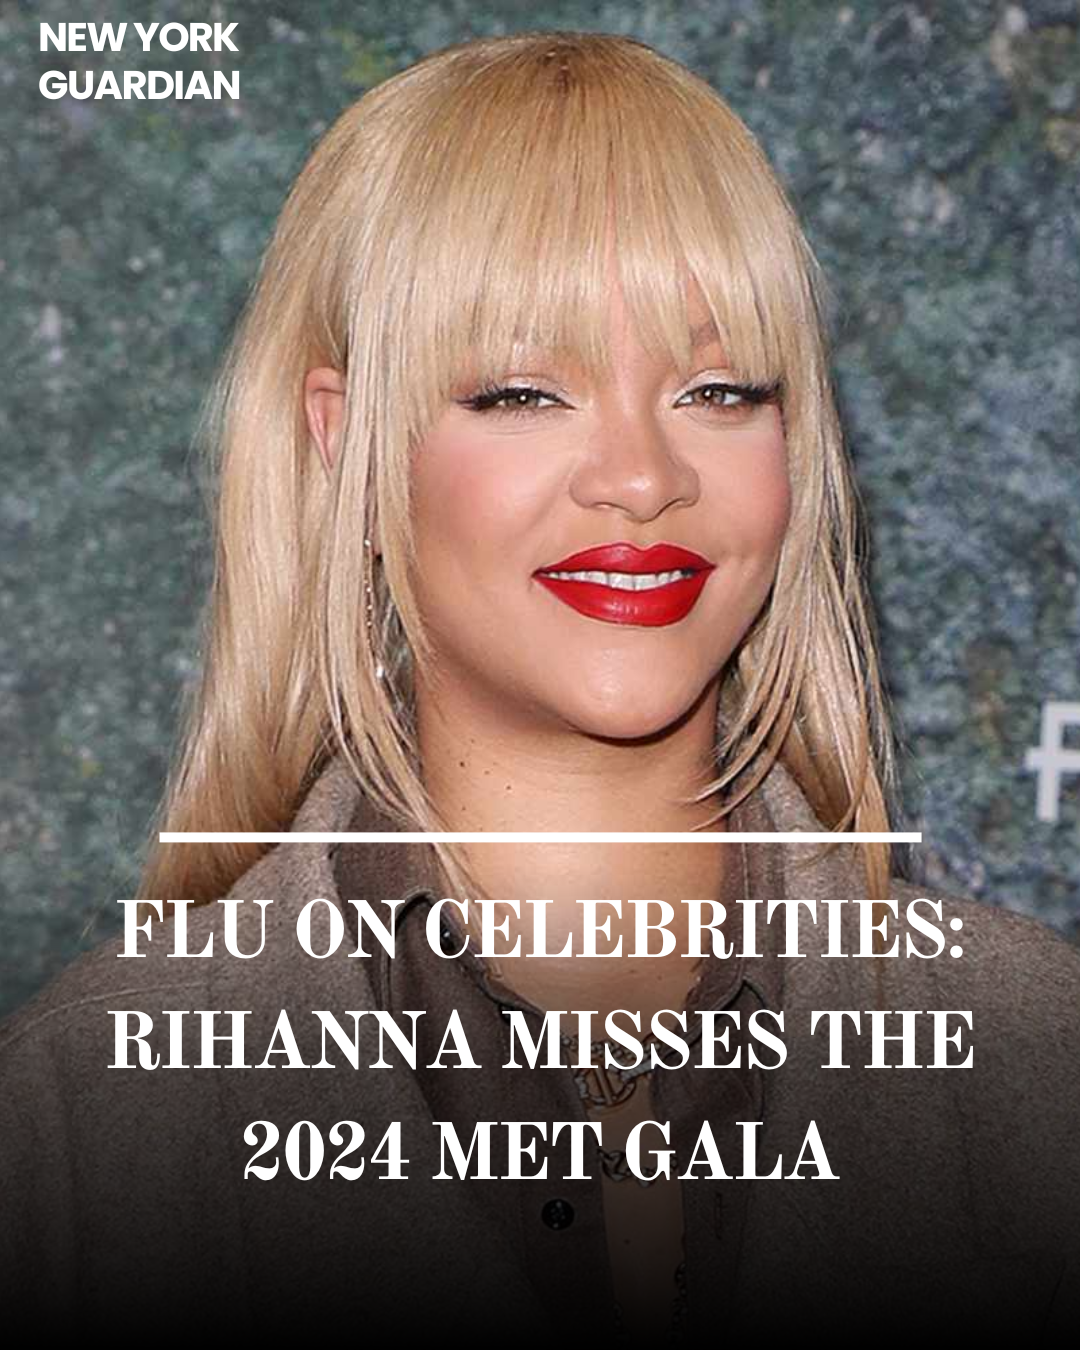 Rihanna had to miss the 2024 Met Gala owing to the sickness, especially after her amazing performance with A$AP Rocky.